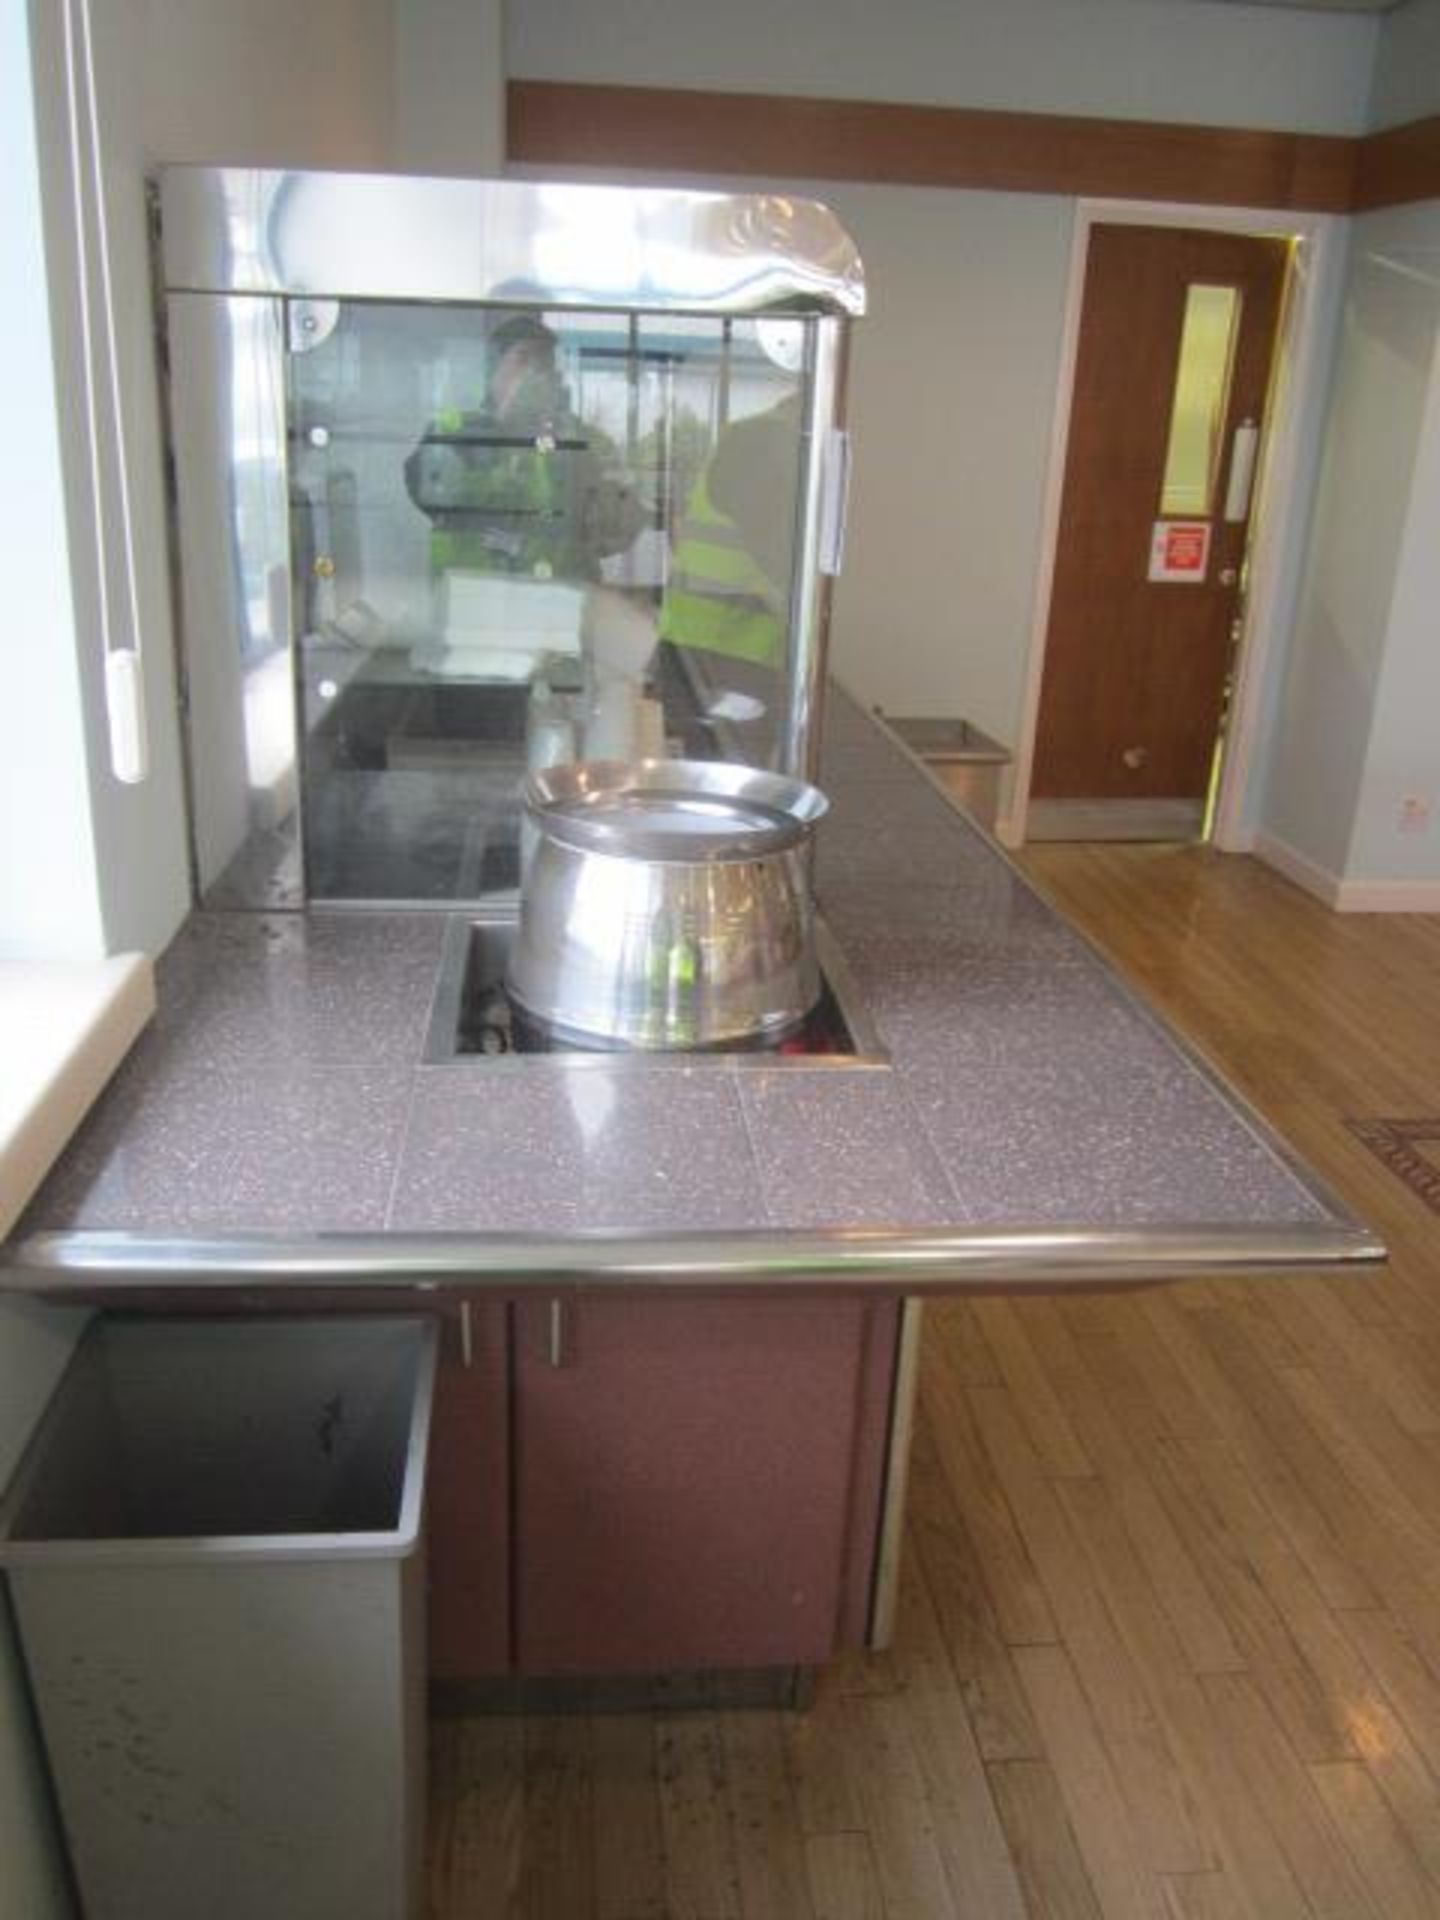 Tiled top serving counter with glass shelf chiller display, under canopy lighting, soup warmer, - Image 9 of 10